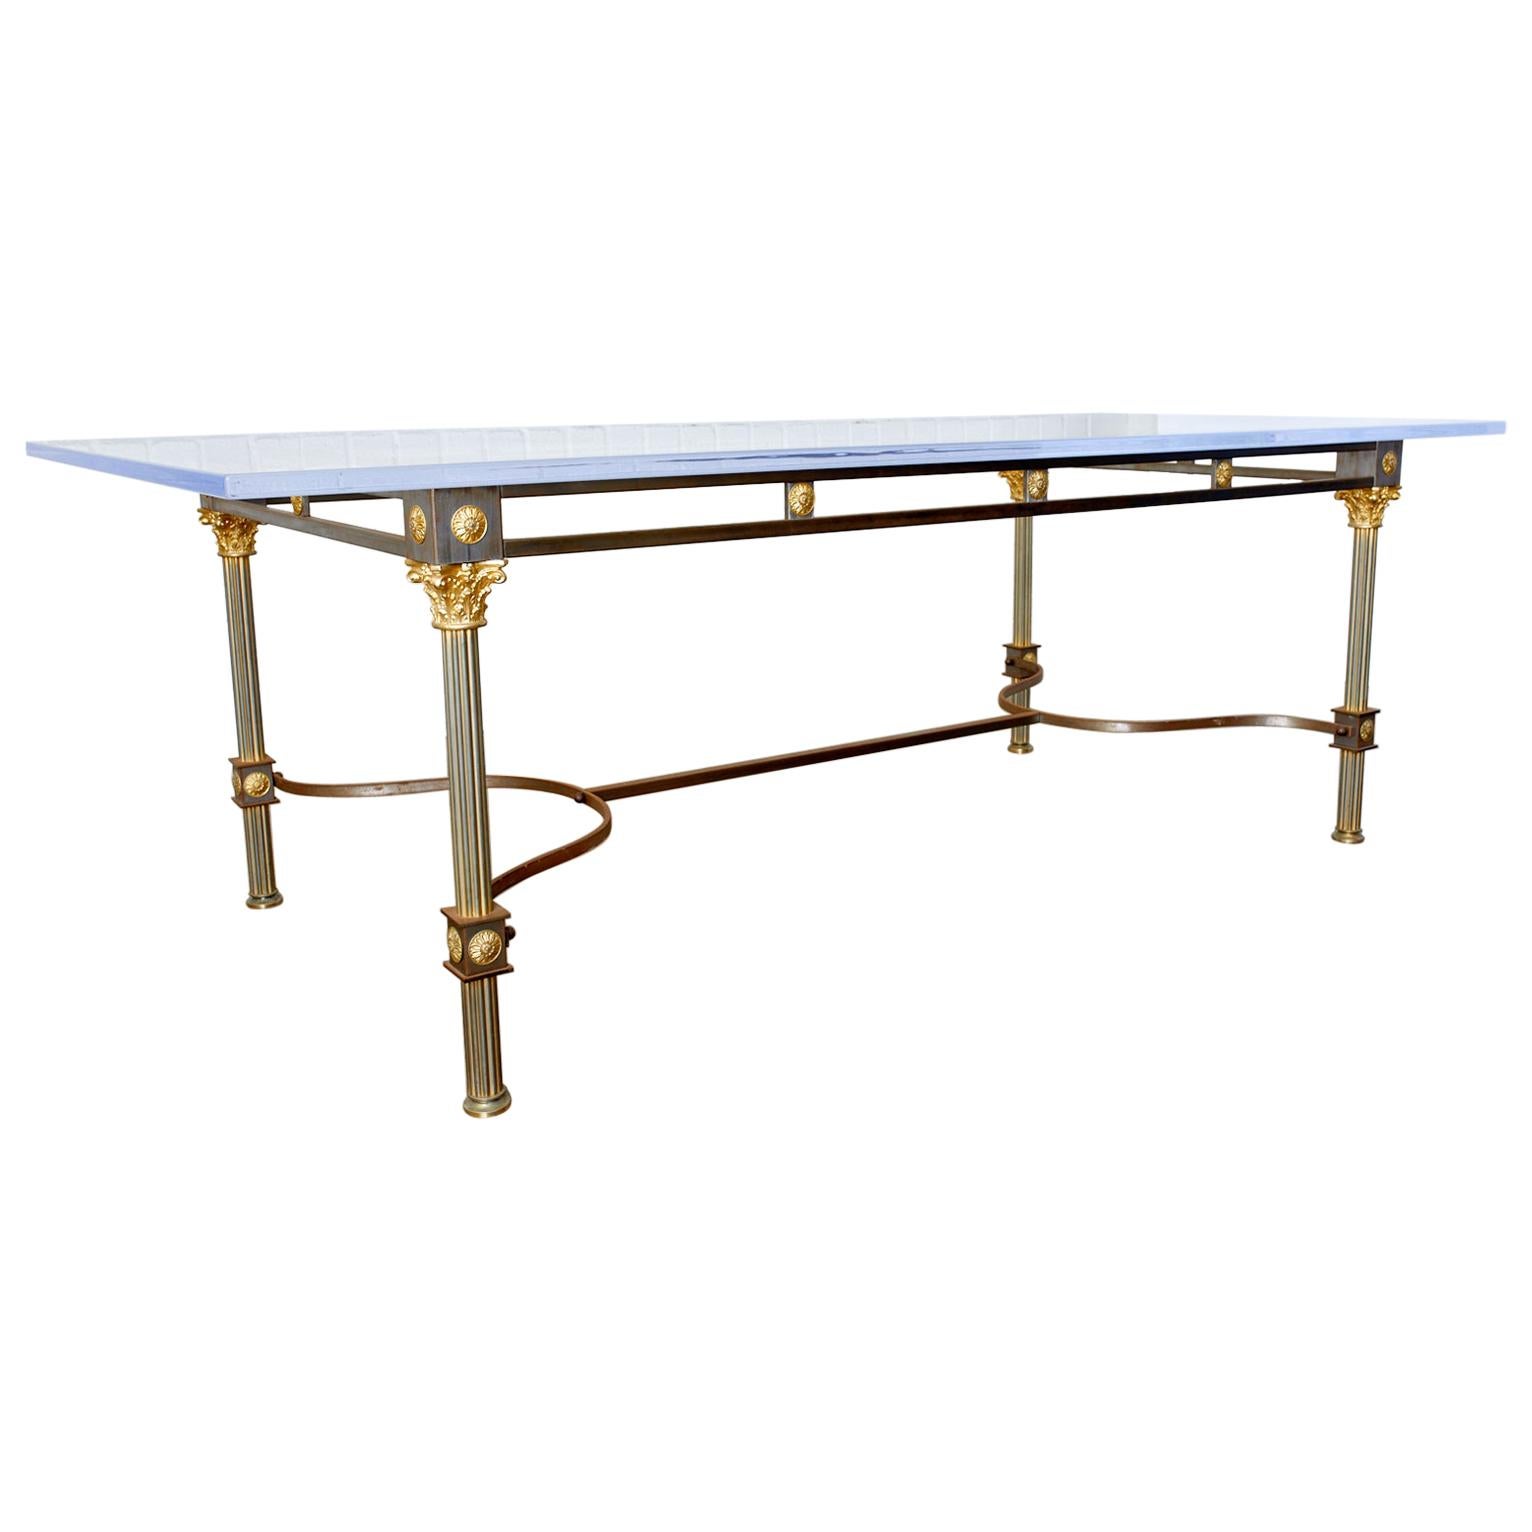 Dramatic steel and brass dining table by Maison Jansen with a later lucite top. Features Corinthian style capitols with fluted columns on each corner supporting the top. The columns are conjoined by gracefully curving stretchers on bottom. The apron